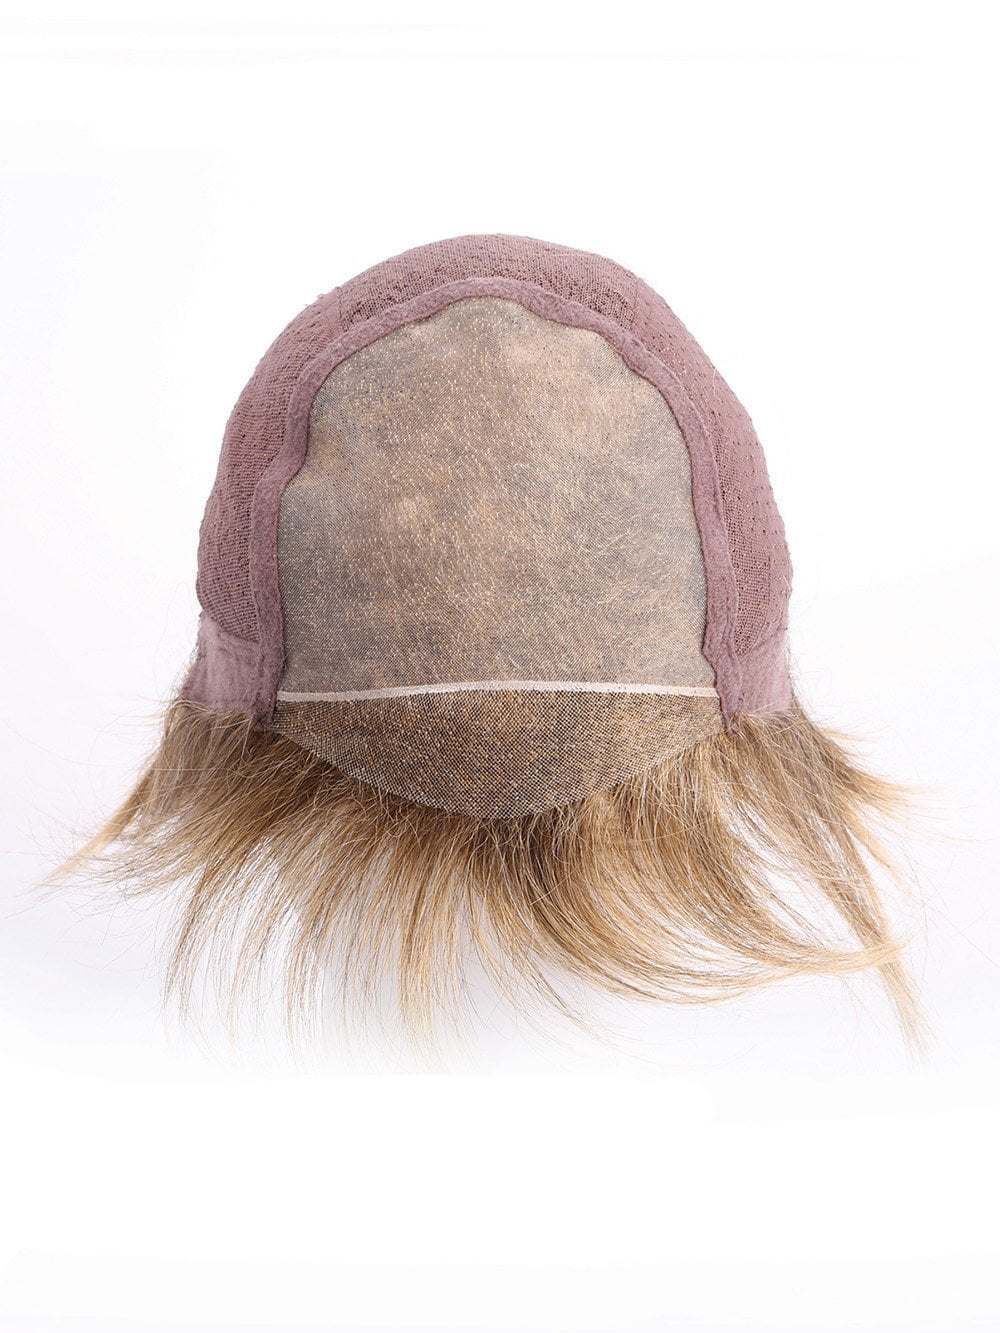 Sheer Indulgence Lace Front Monofilament & a 100% Hand-Knotted Cap